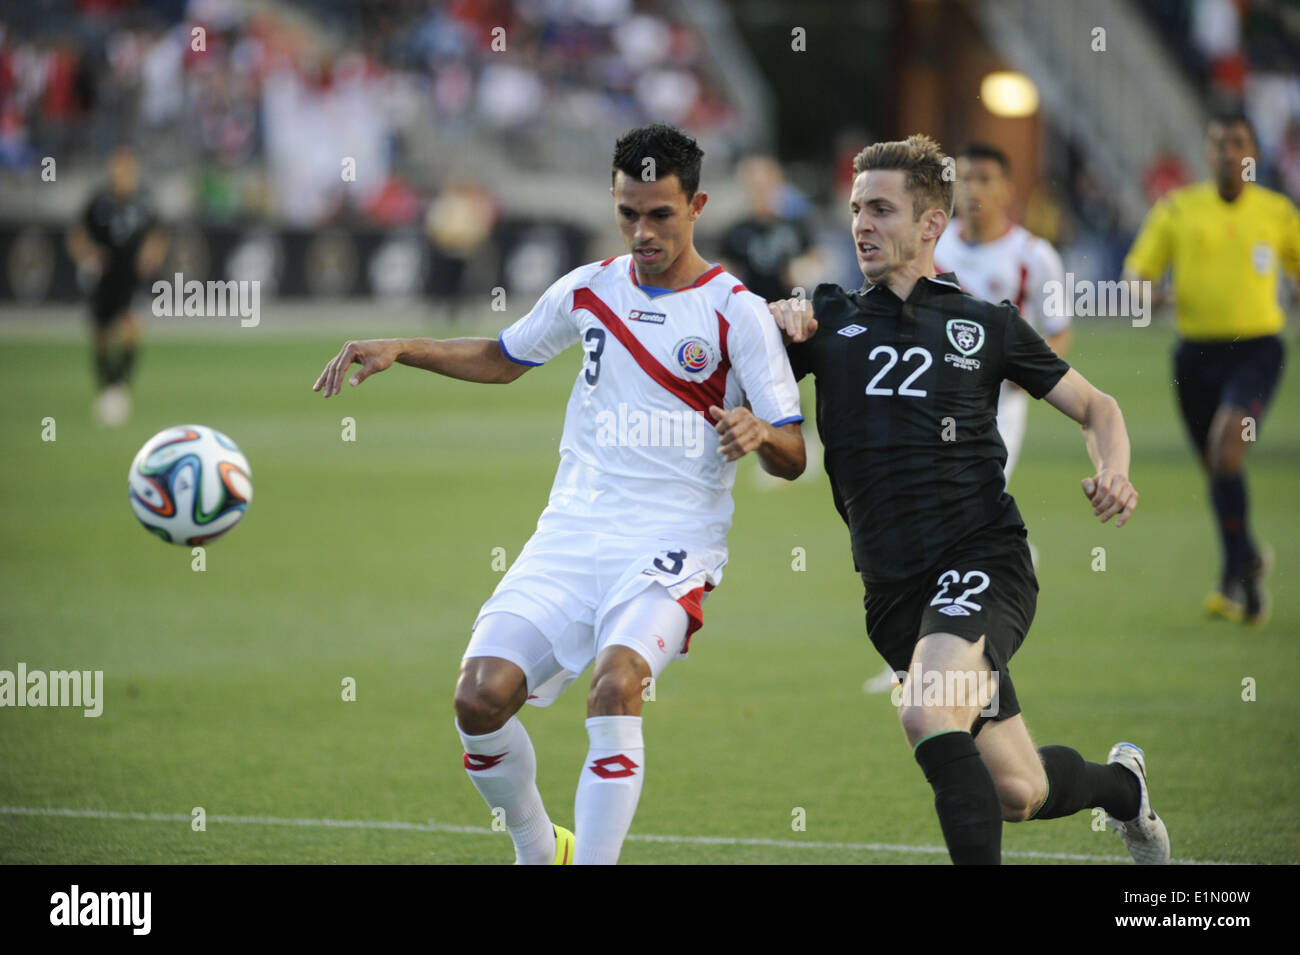 Chester, Pennsylvania, USA. 6th June, 2014. Costs Rica player GIANCARLO GONZALEZ (3) in action against Ireland player, KEVIN DOYLE (22) during the Freedom Cup match held at PPL Park in Chester Pa Credit:  Ricky Fitchett/ZUMAPRESS.com/Alamy Live News Stock Photo